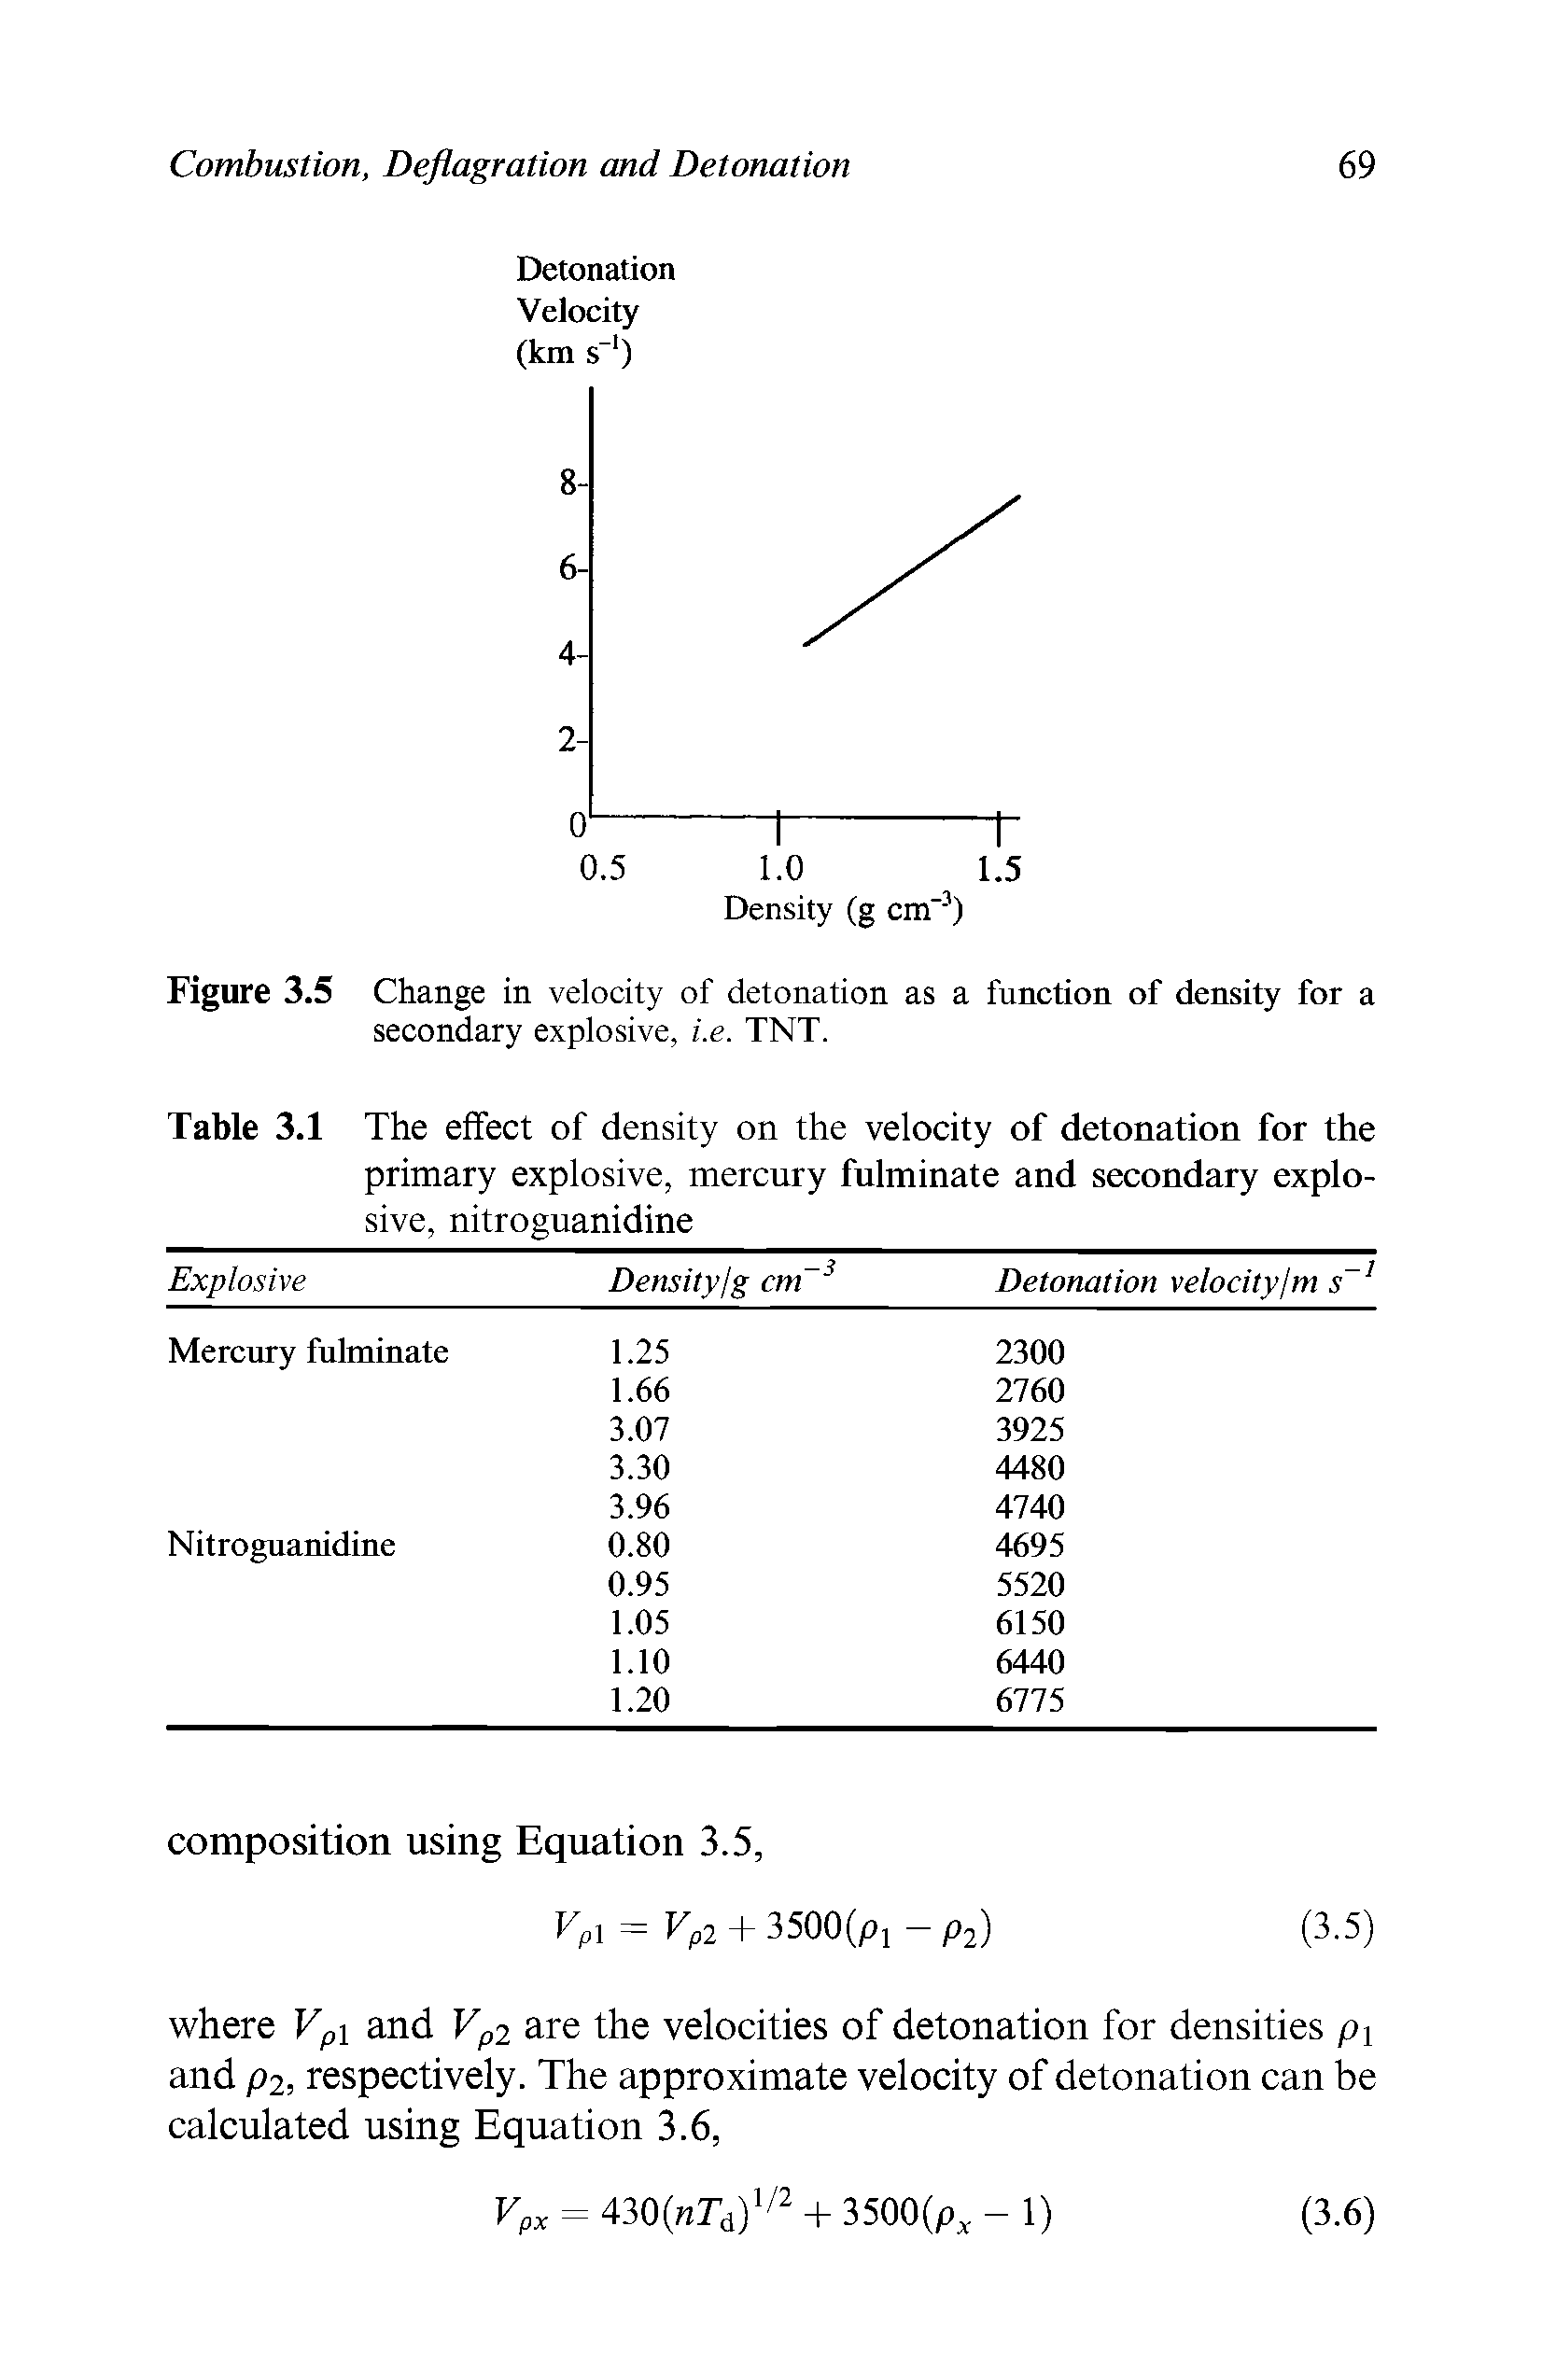 Table 3.1 The effect of density on the velocity of detonation for the primary explosive, mercury fulminate and secondary explosive, nitroguanidine...